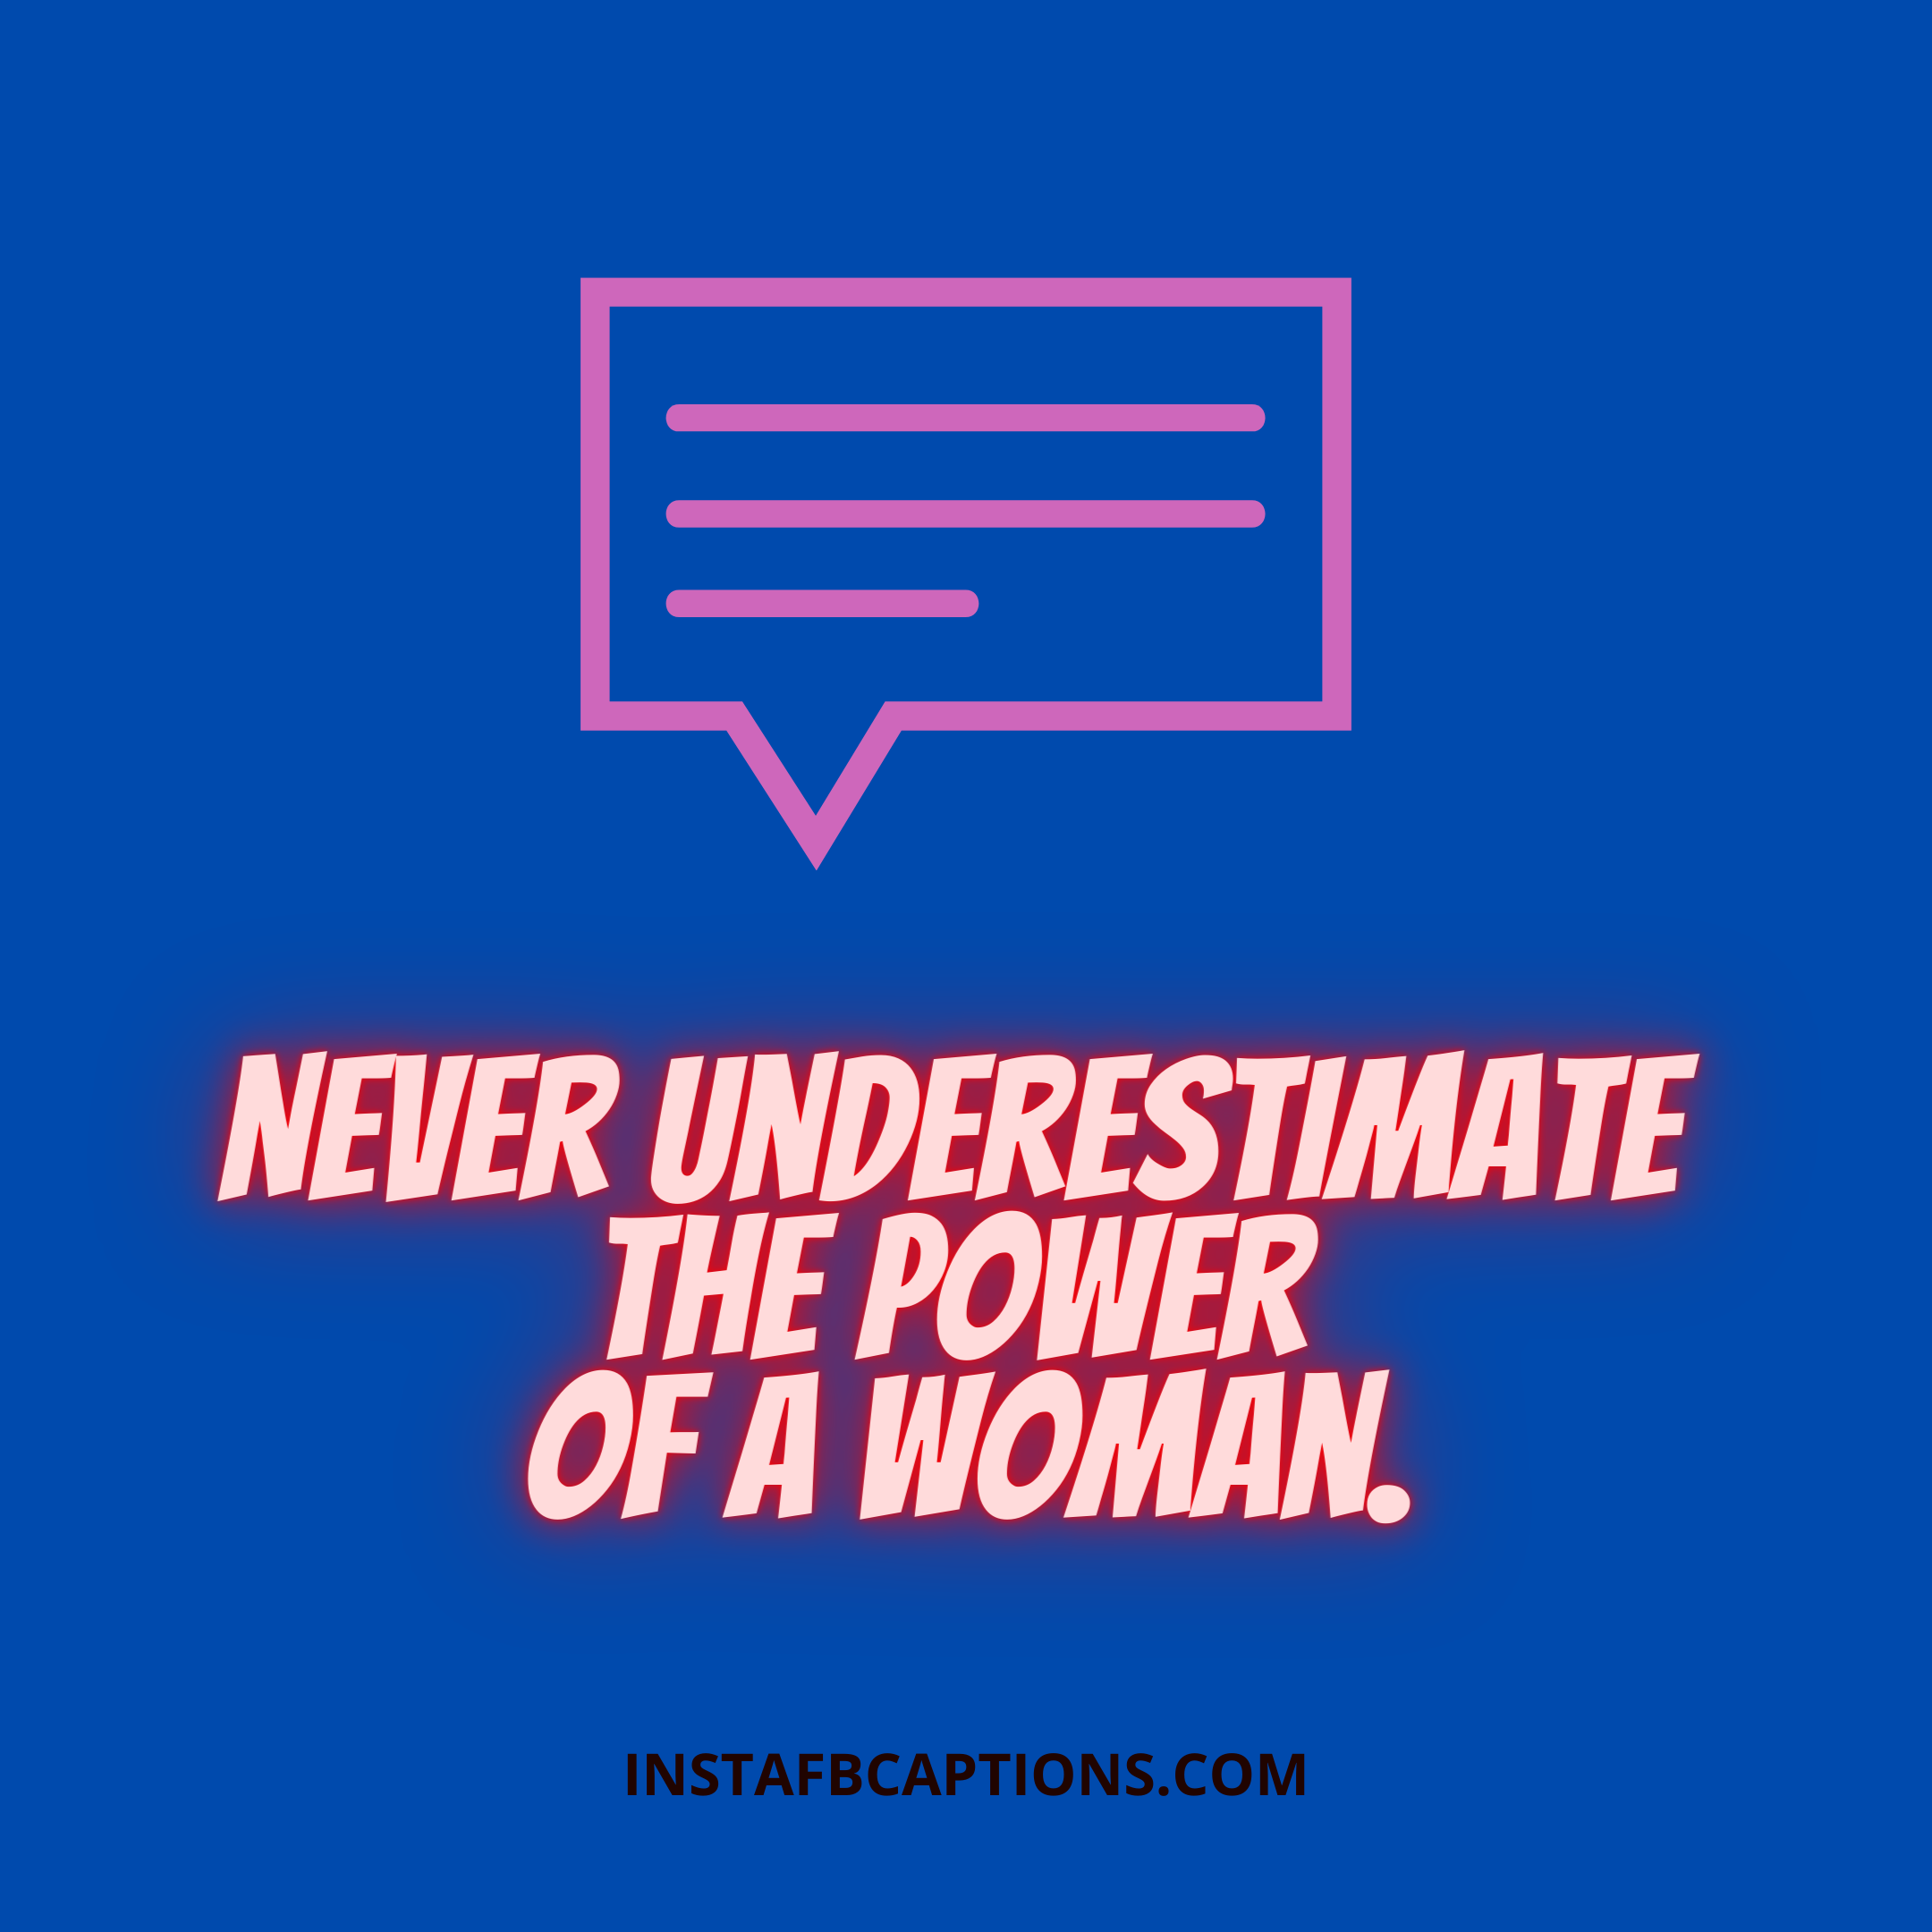 Never Underestimate The Power Of A Woman  - Never underestimate the power of a woman - [New Ideas] Best Comments for Girls Instagram Facebook Posts in 2023